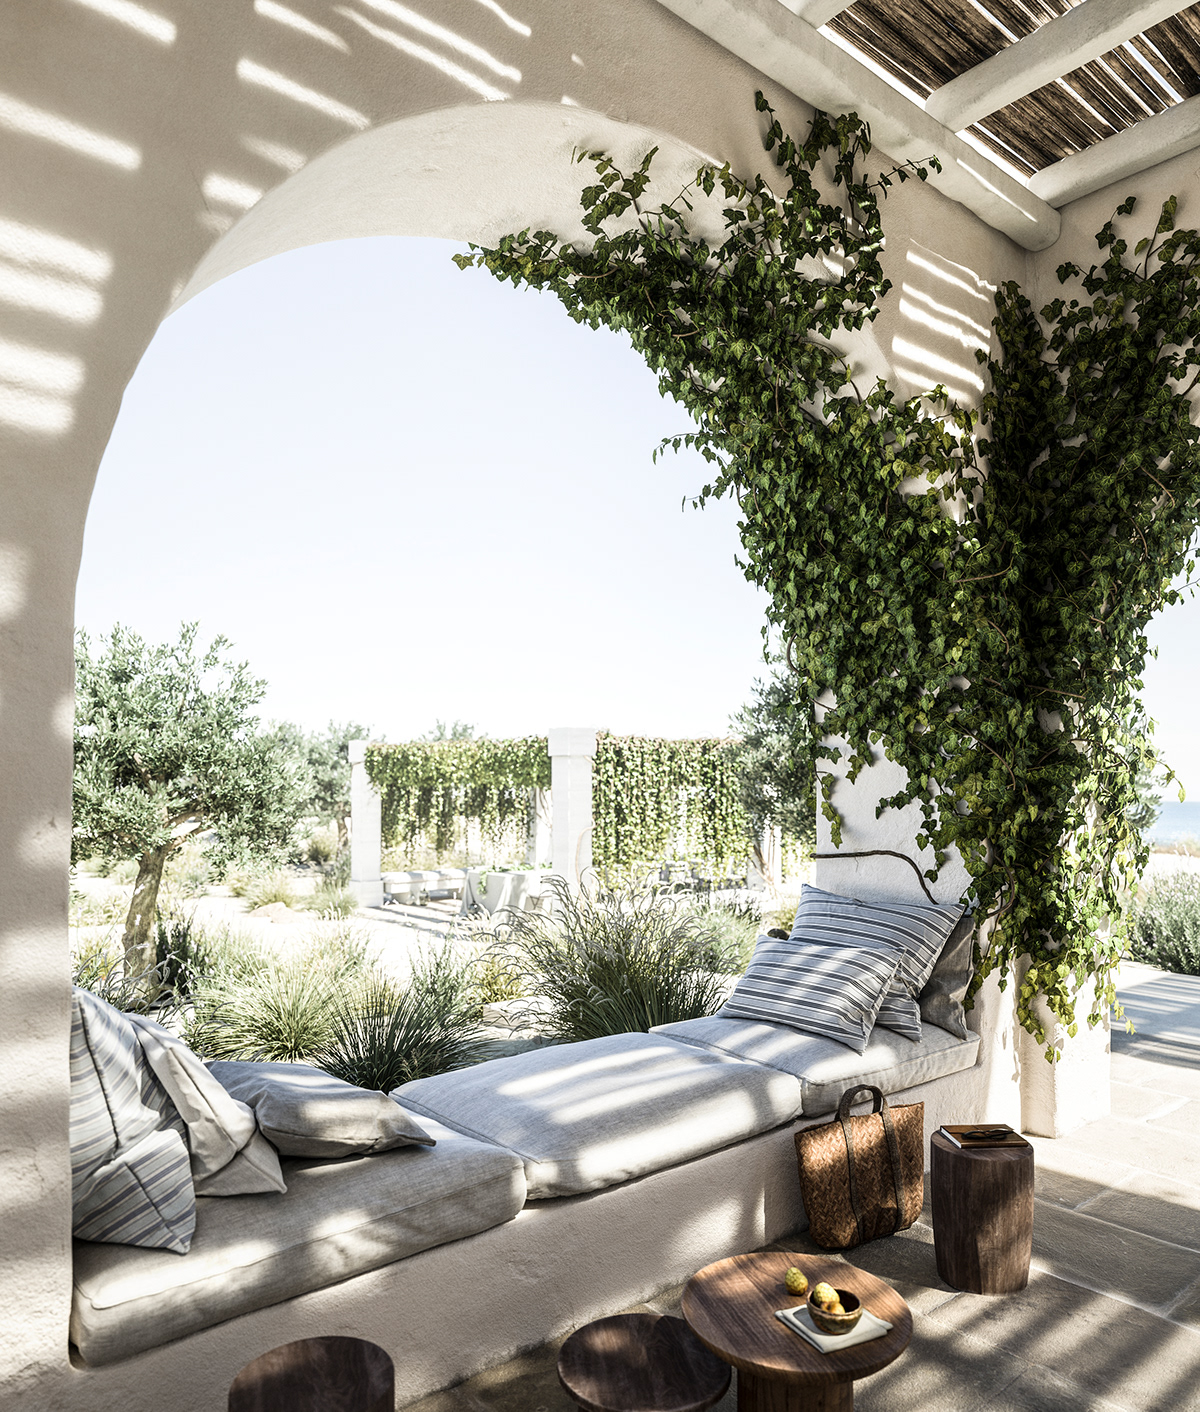 Render architecture CG Photography  styling  creative lighting Greece visual 3D